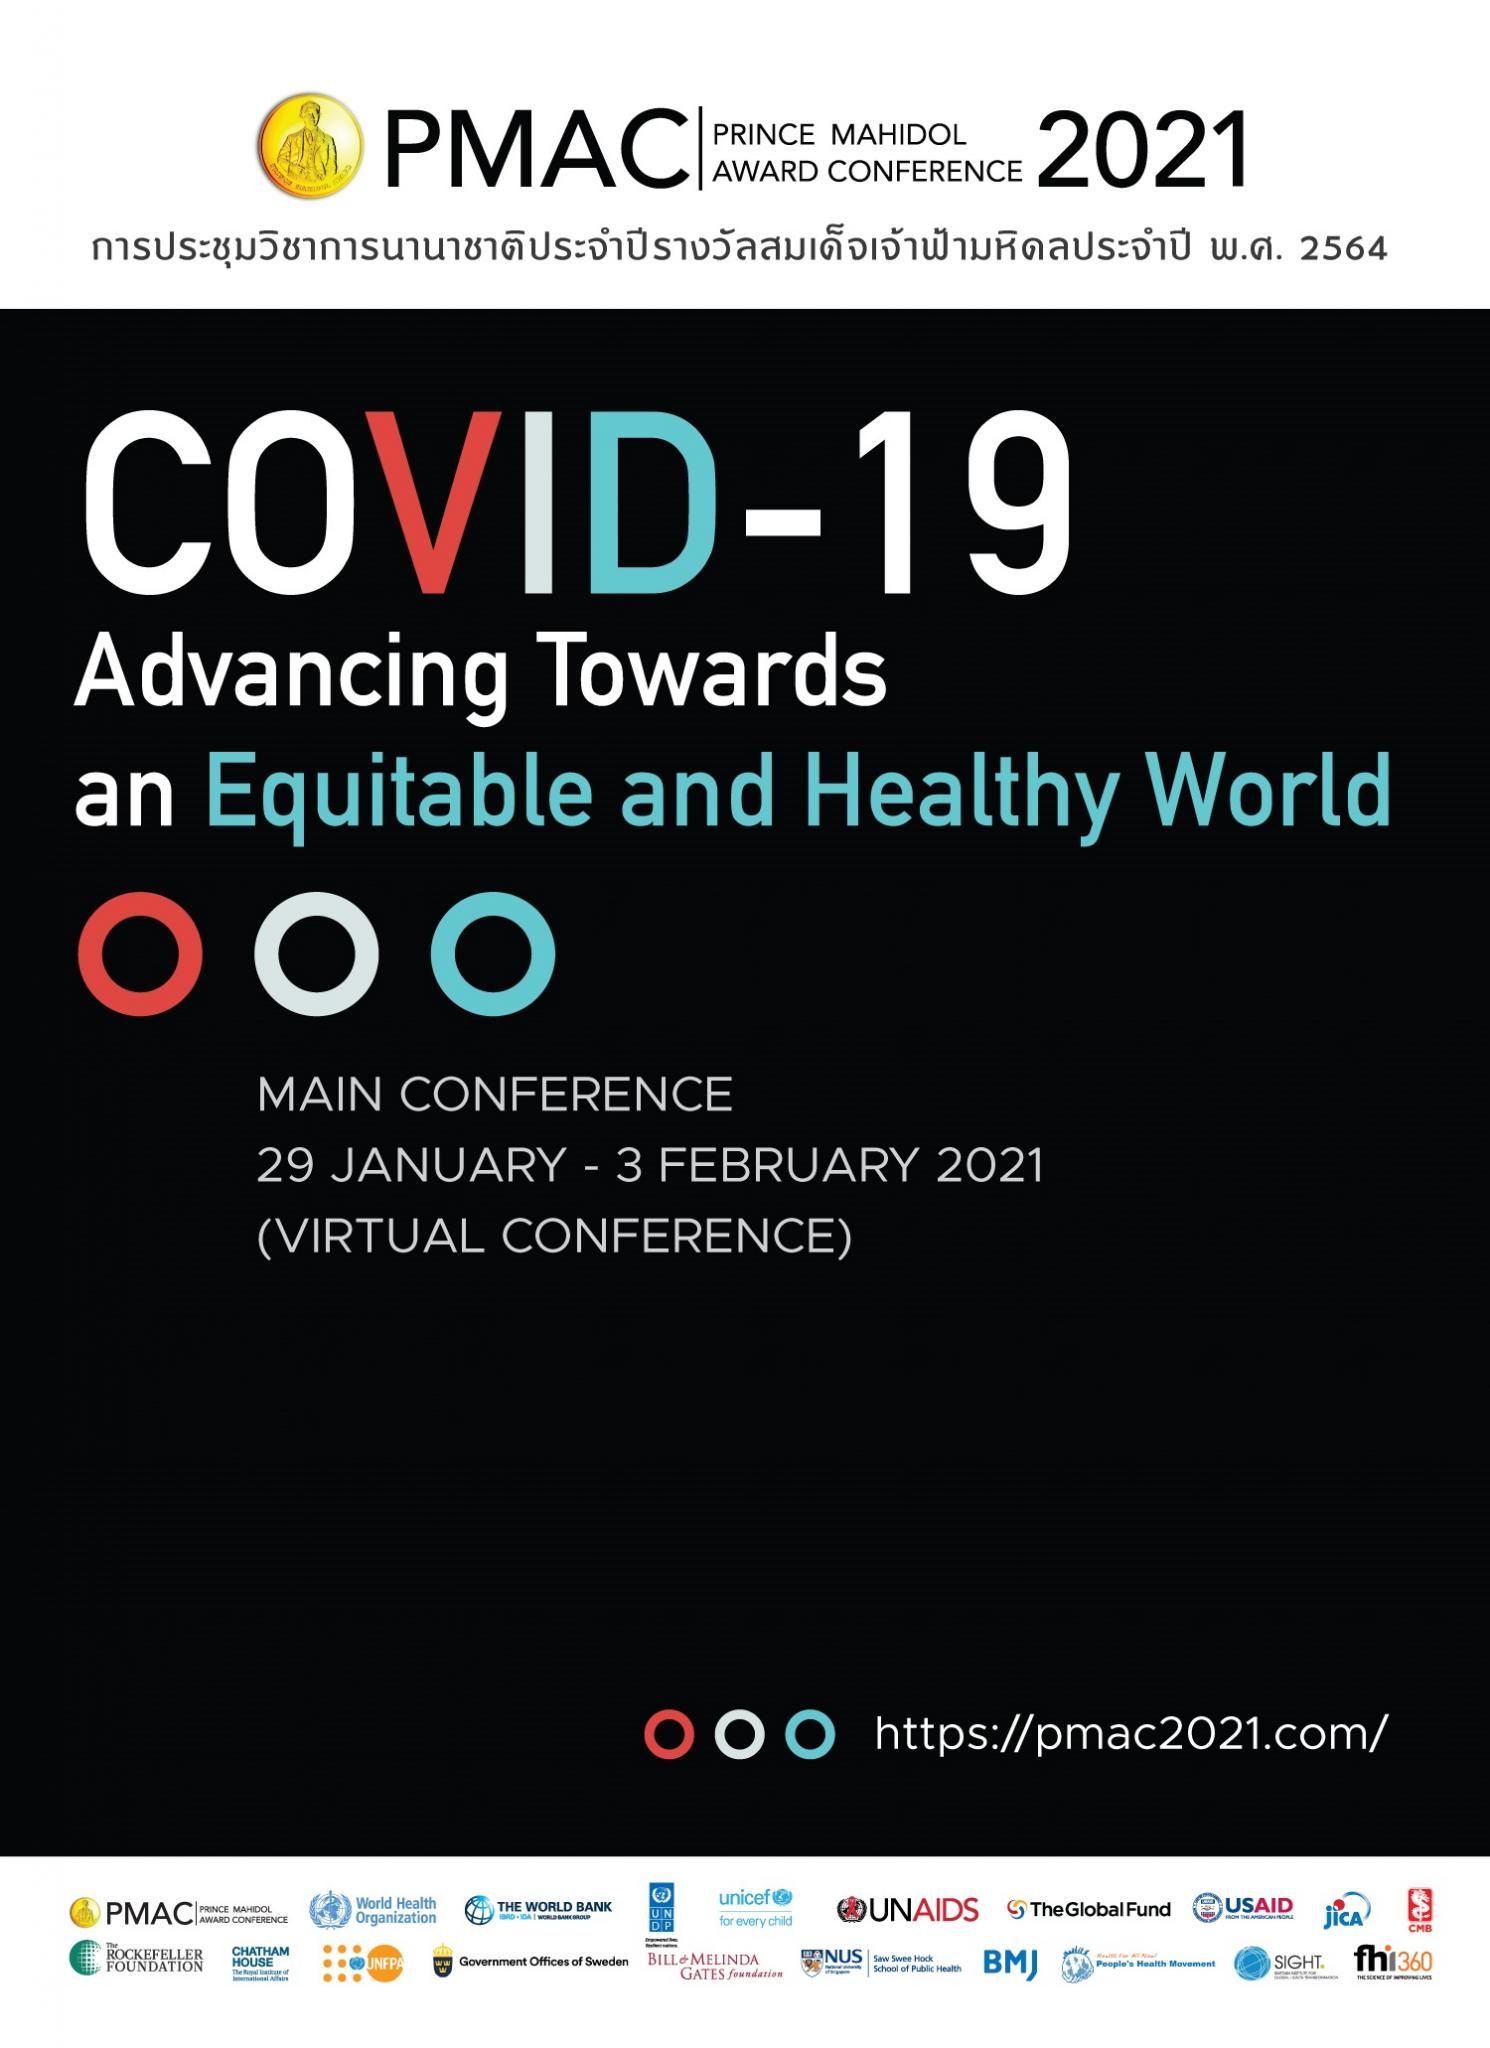 PMAC 2021 COVID-19 Advancing Towards an Equitable and Healthy World